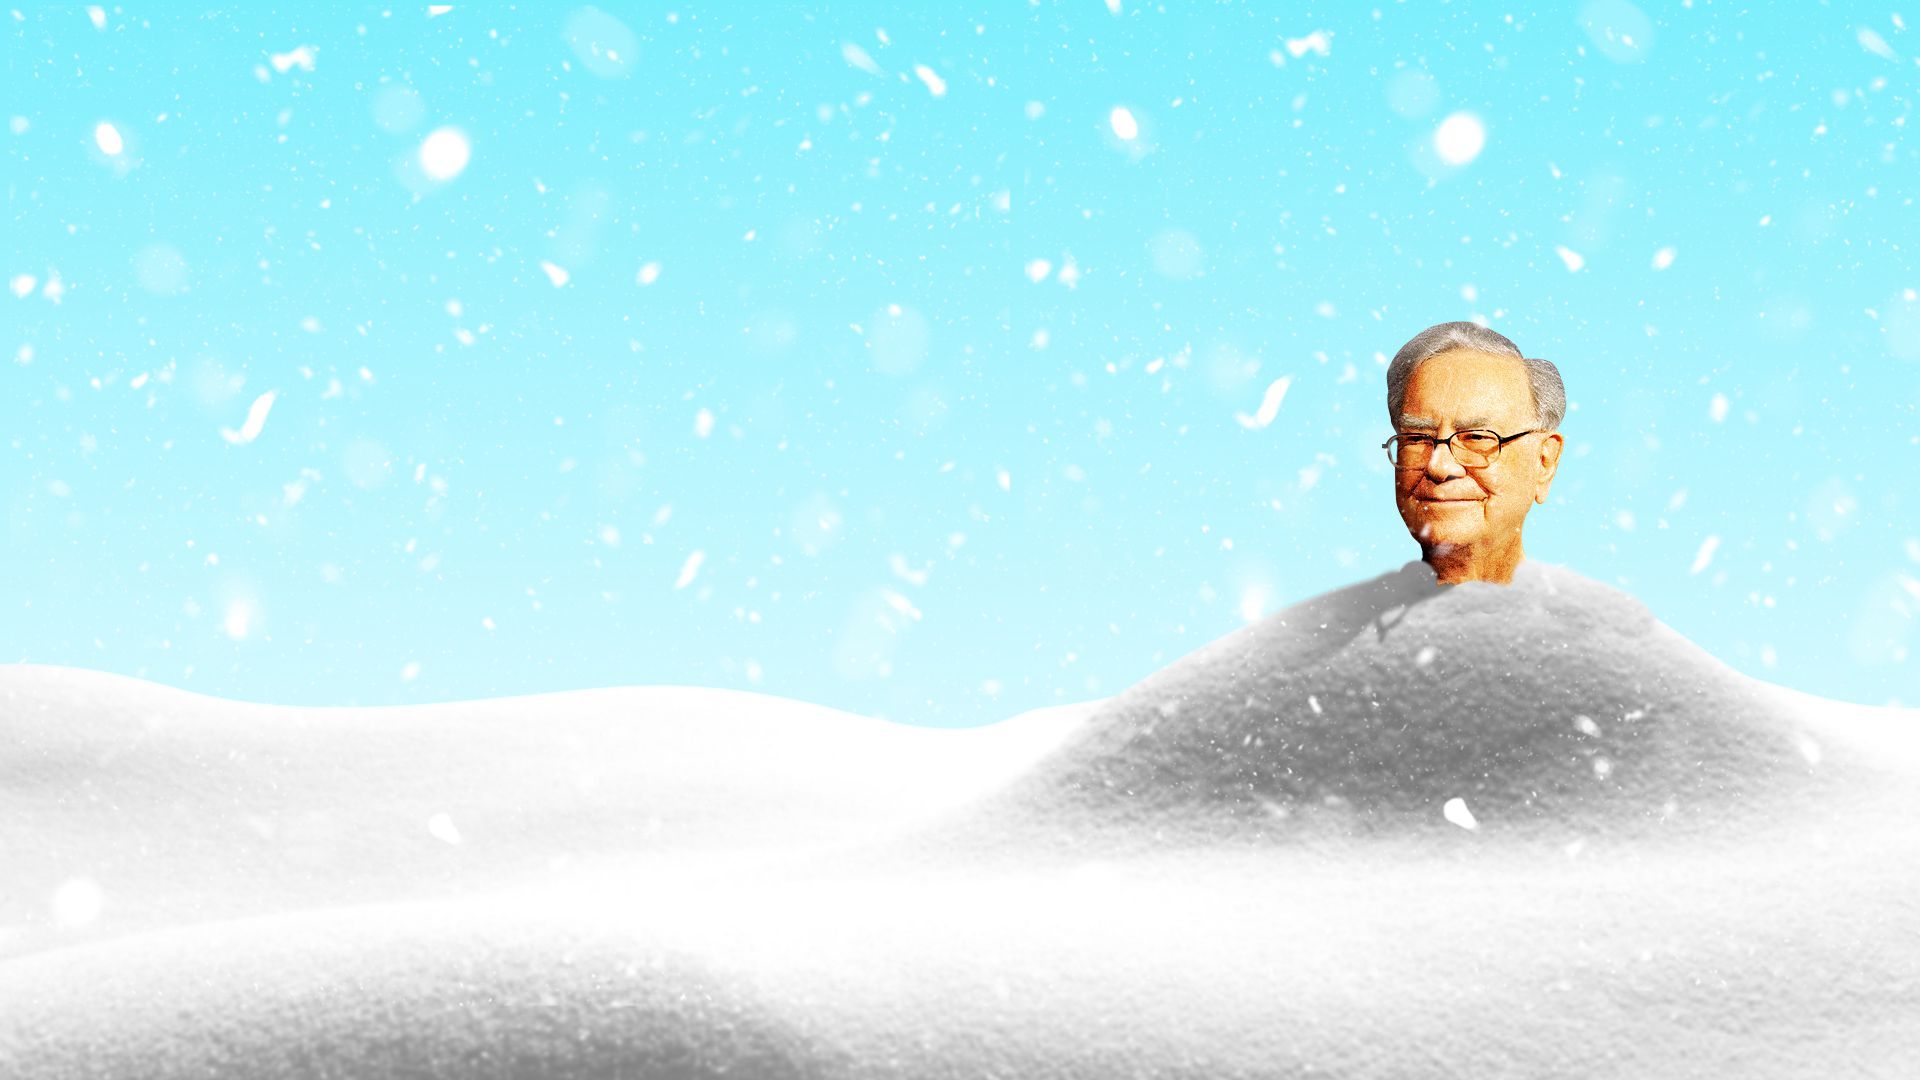 Photo illustration of Warren Buffet's head popping out of a pile of snow. 